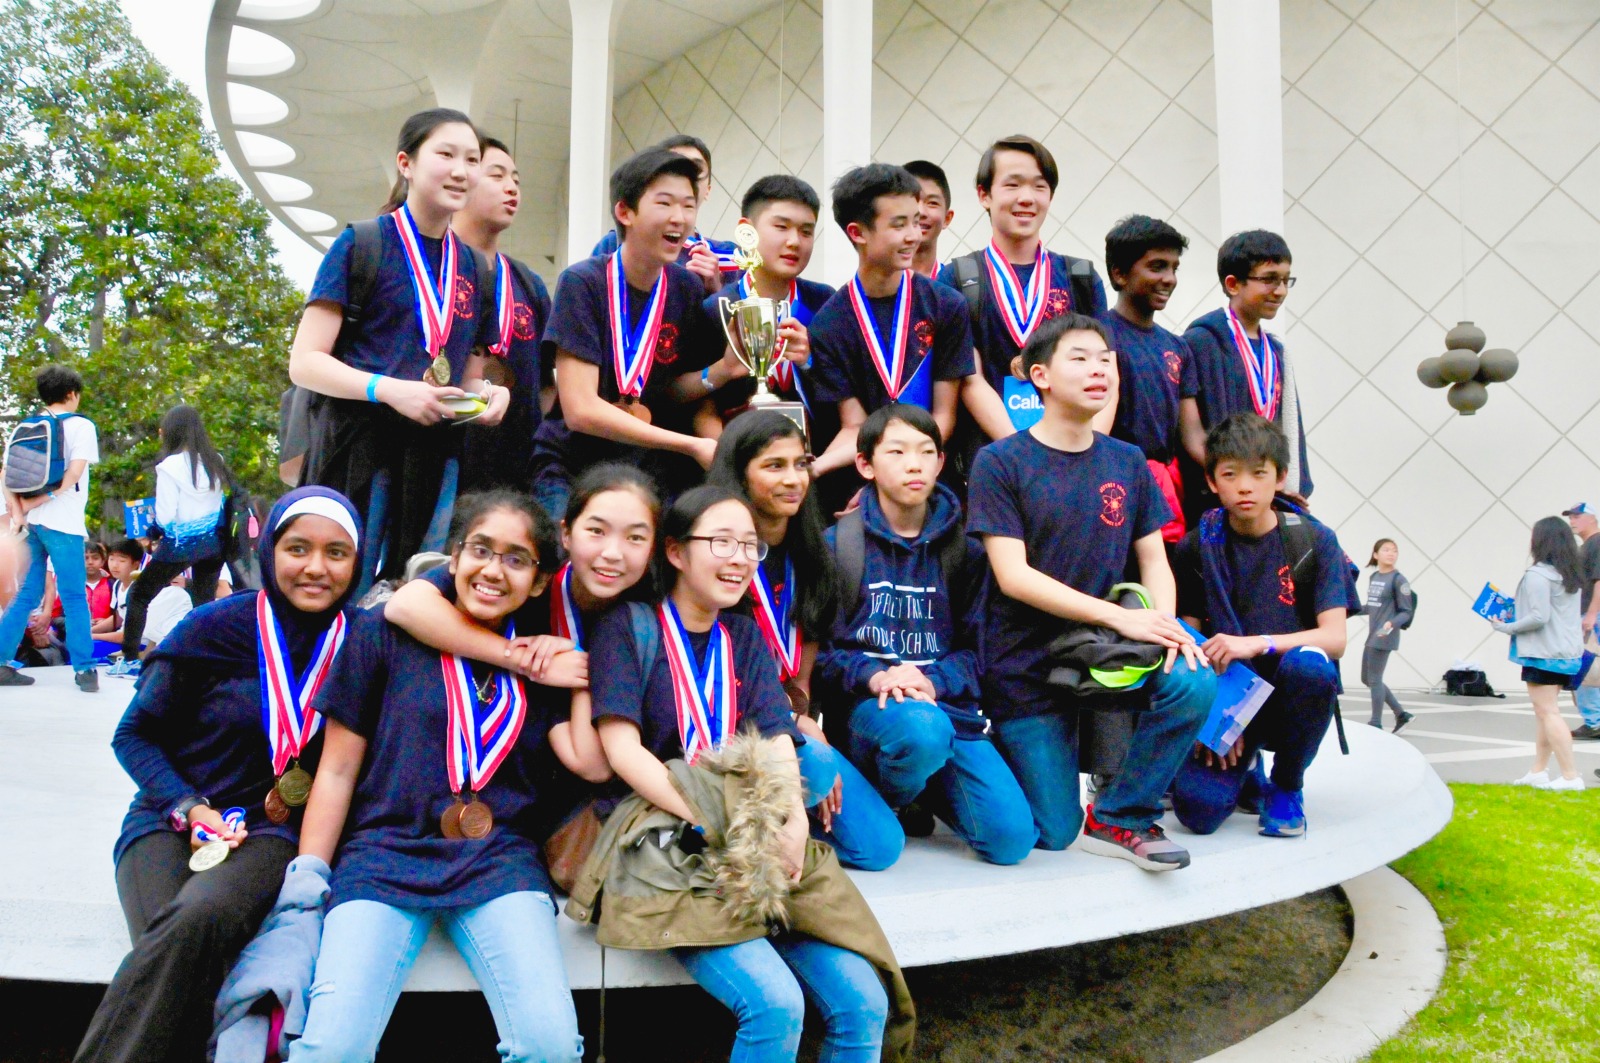 Members of the Jeffrey Trail Middle School Science Olympiad team